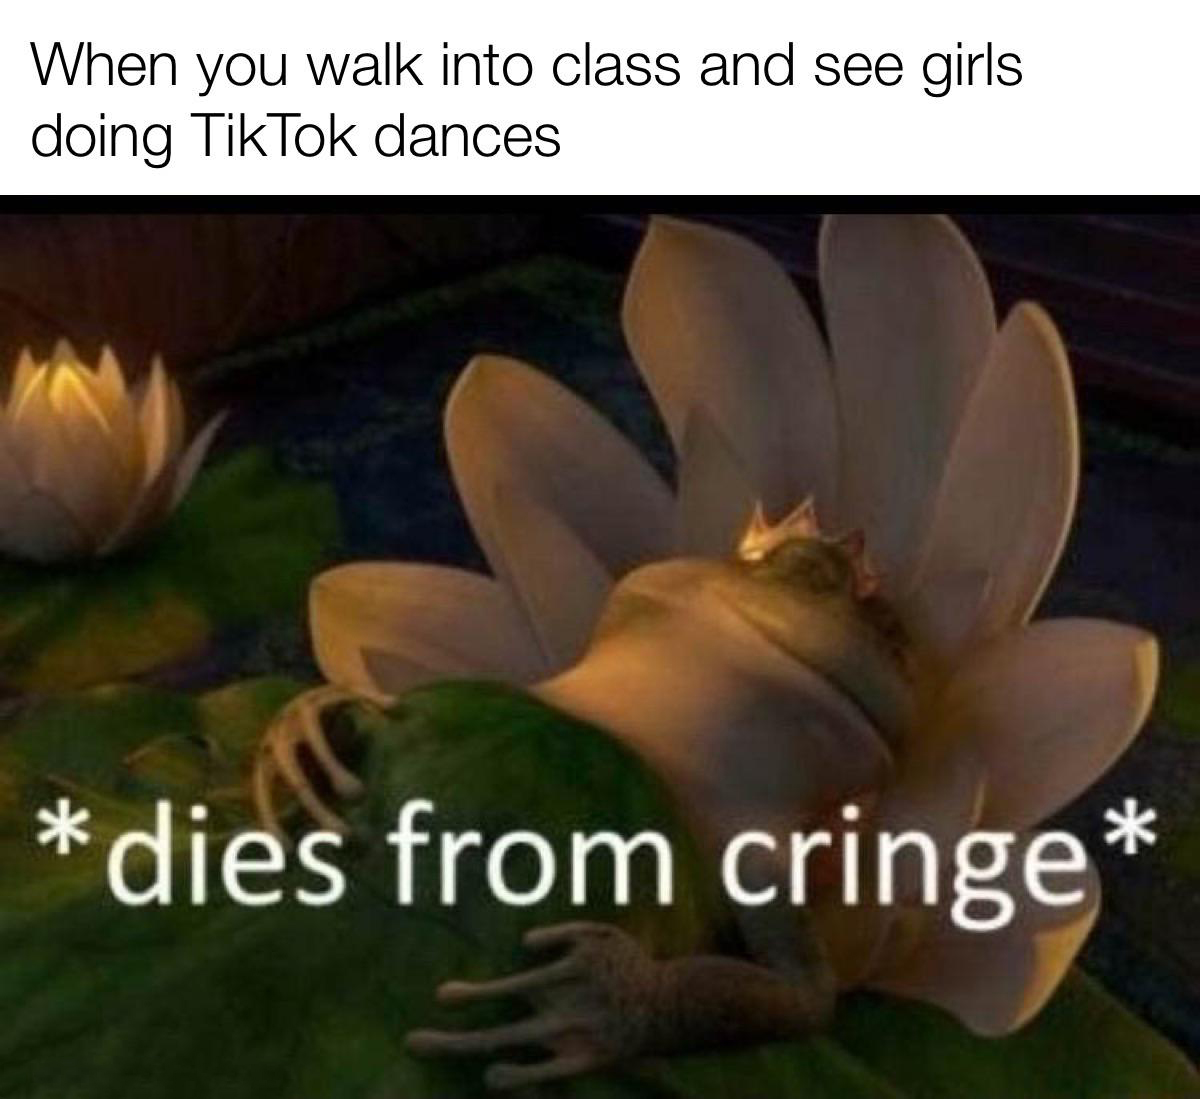 daily dose of memes - turning red cringe meme - When you walk into class and see girls doing TikTok dances dies from cringe